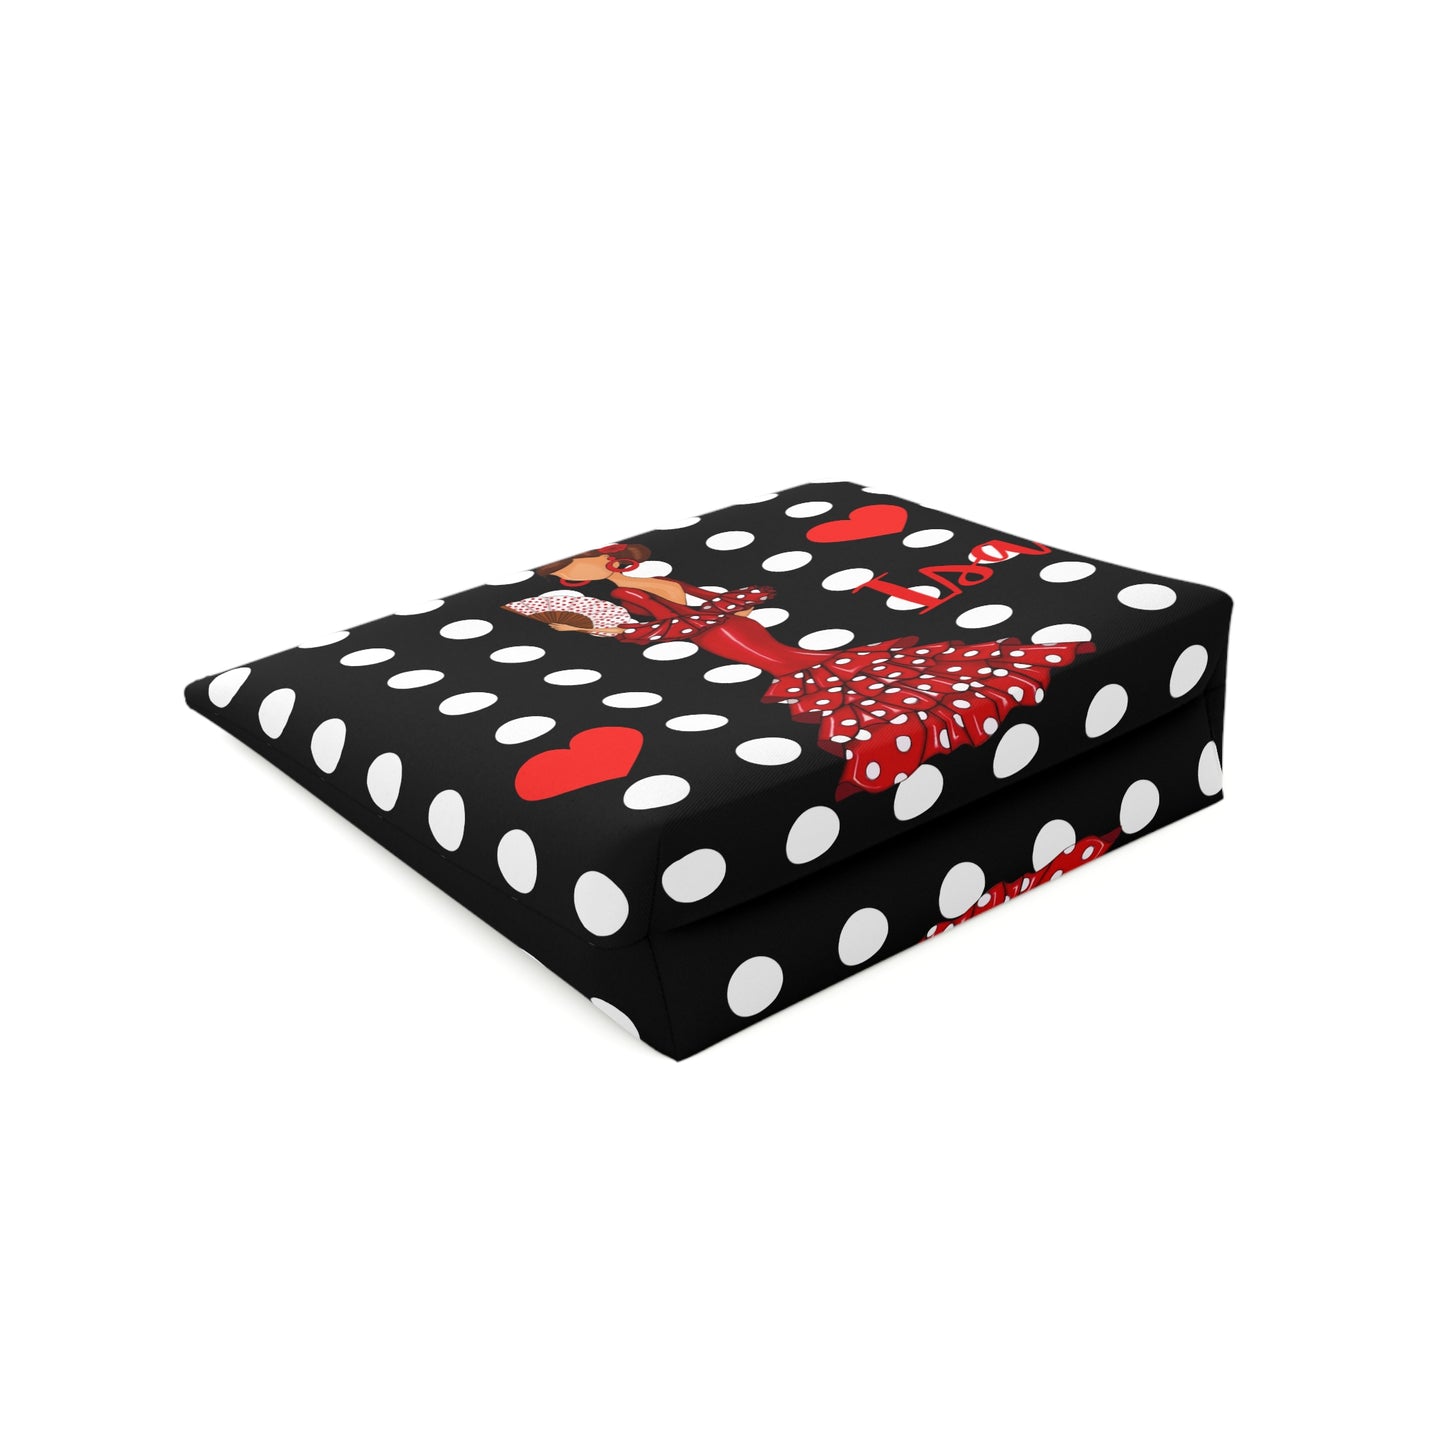 a black and white polka dot box with a red bow